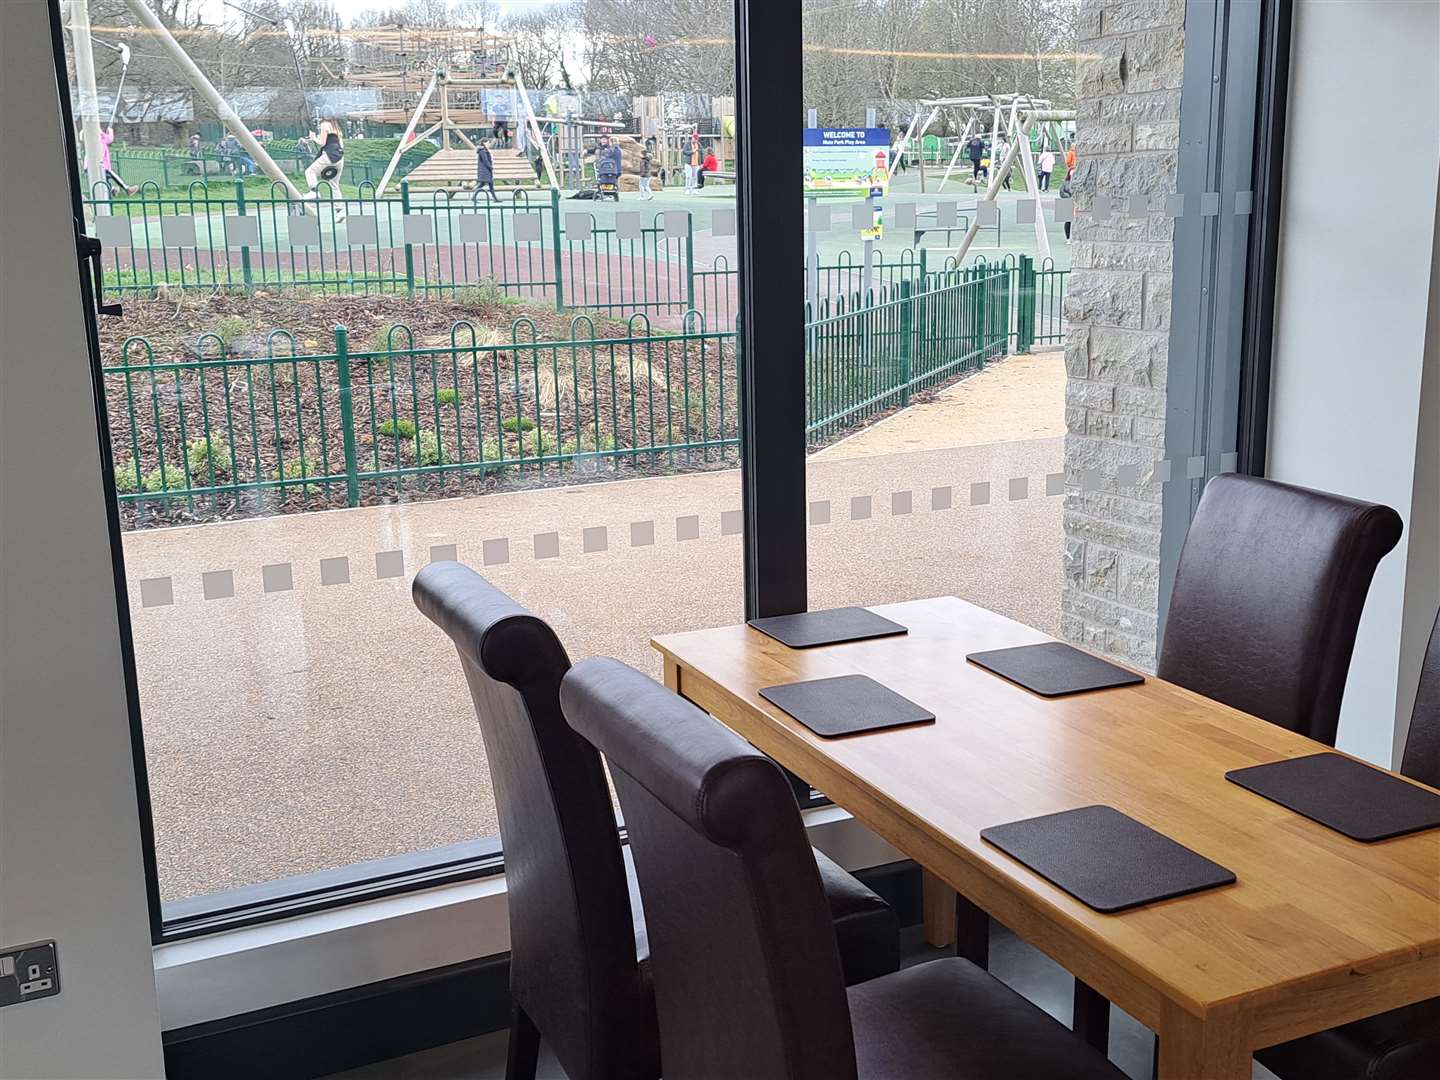 The cafe has views of the play area